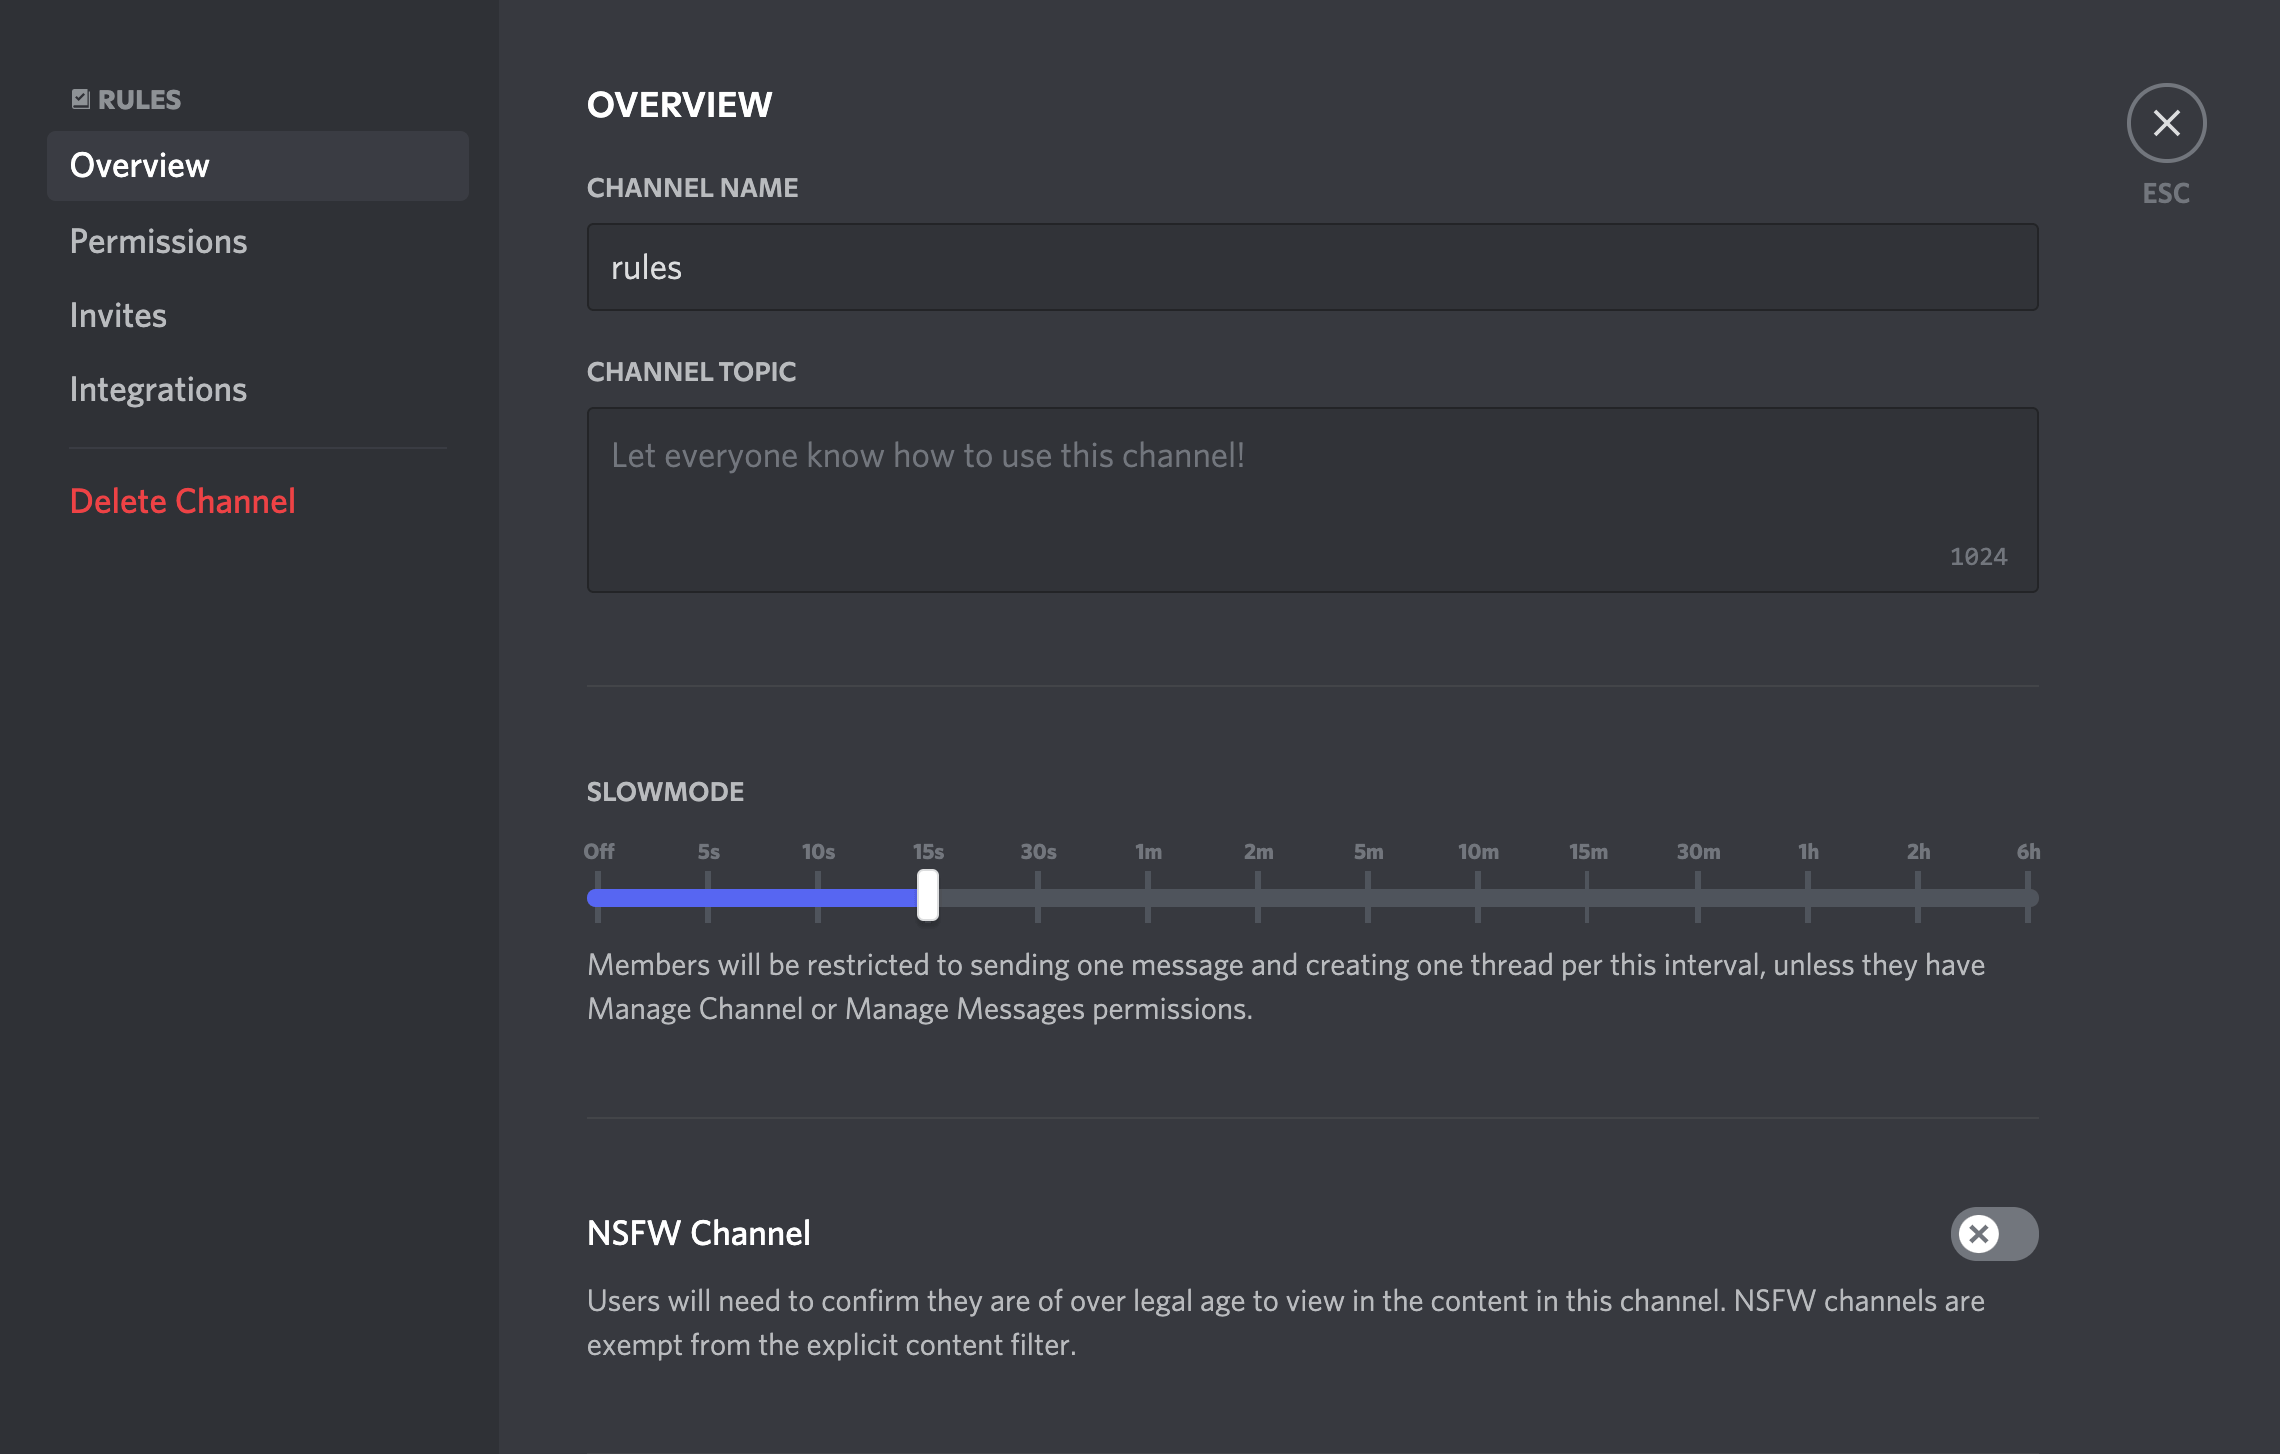 actively chat in your discord server along with others